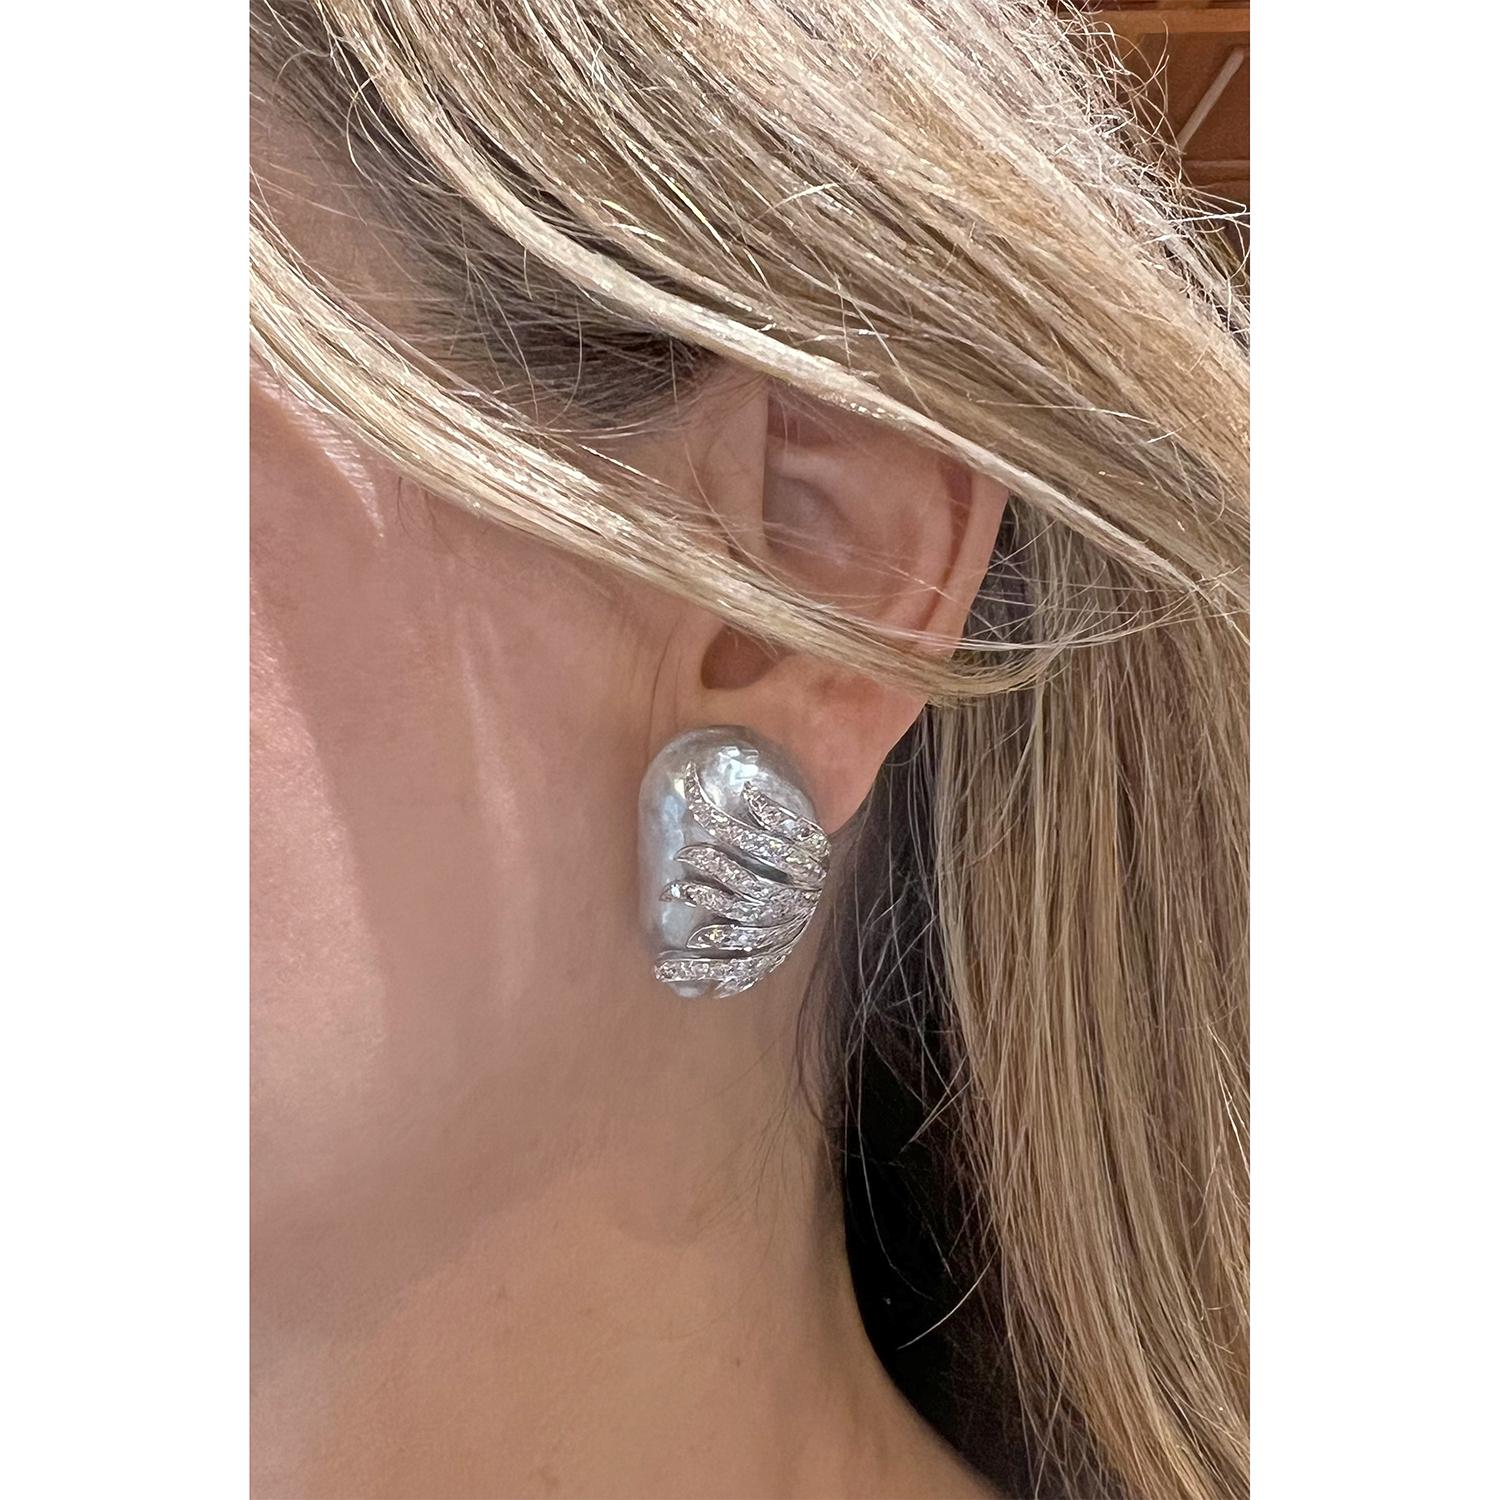 Large baroque South Sea cultured pearl and diamond earrings, featuring a bluish-gray South Sea baroque pearl set in an 18k white gold mounting and a cream-toned white South Sea baroque pearl set in an gray oxidized 18k white gold mounting.  Both